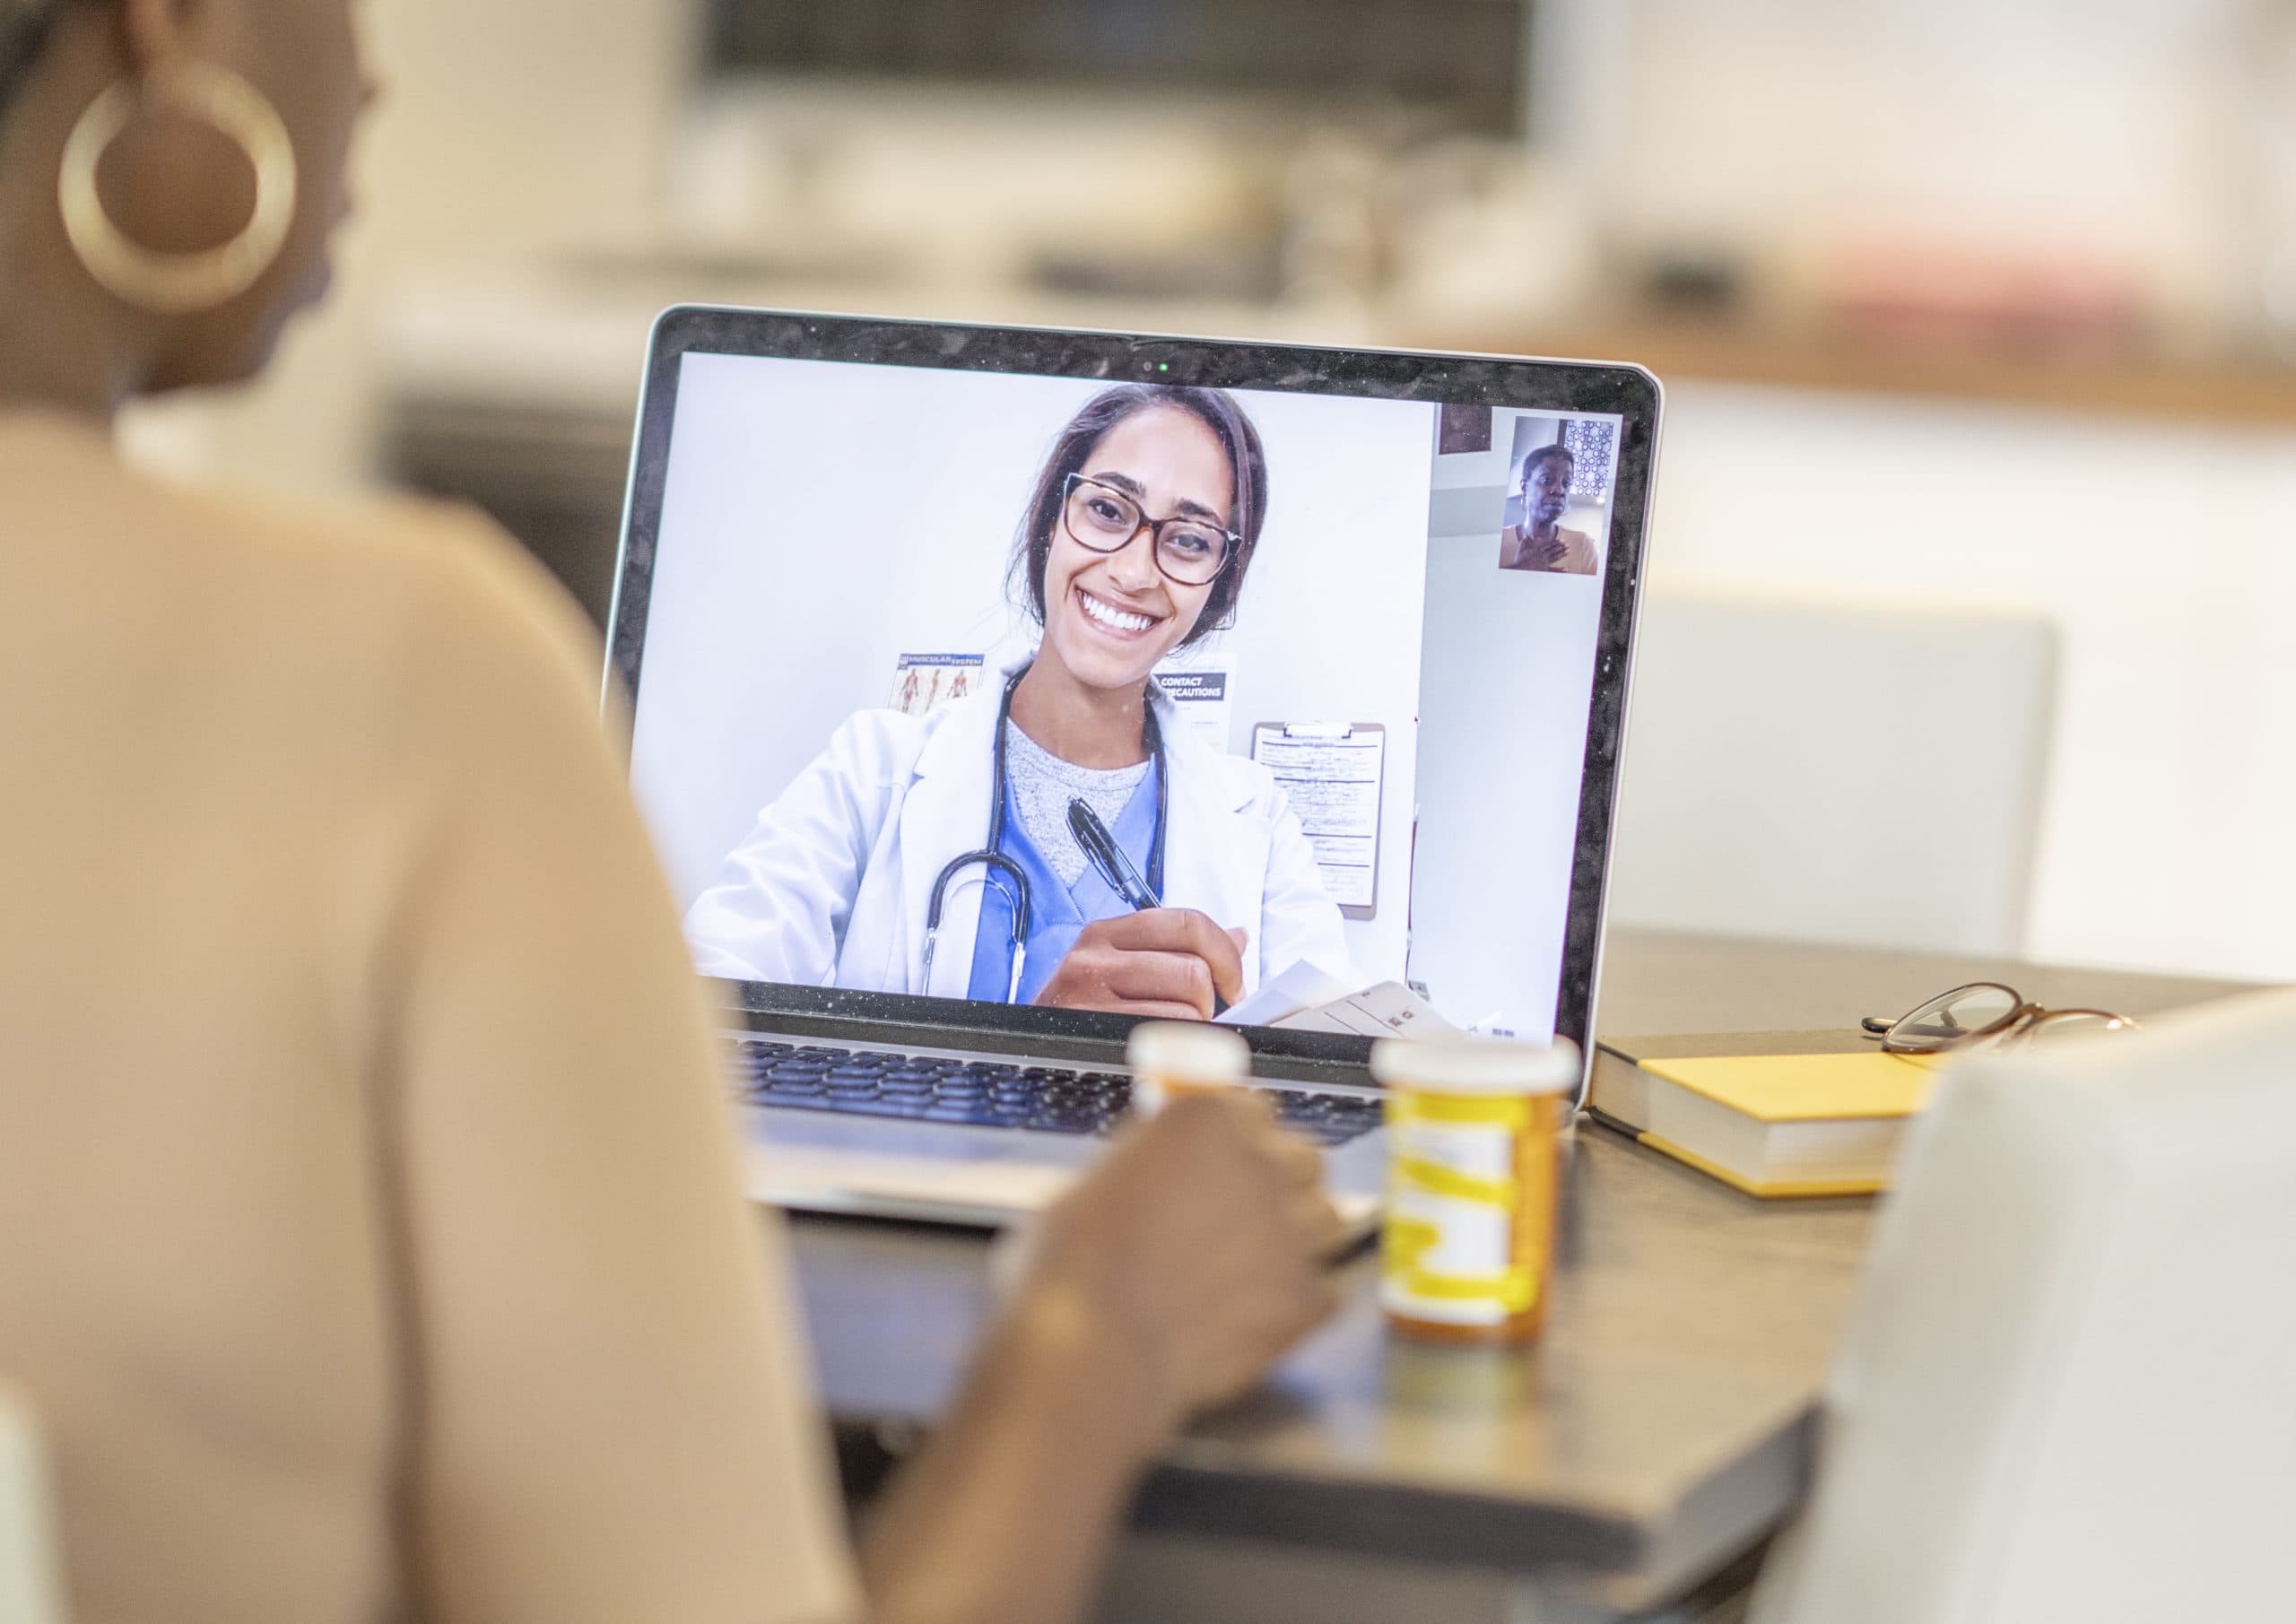 The South Central Telehealth Resource Center, housed at UAMS, has received a three-year grant for $975,000 to fund the expansion of digital health services in rural communities with known health disparities across Arkansas, Mississippi and Tennessee.